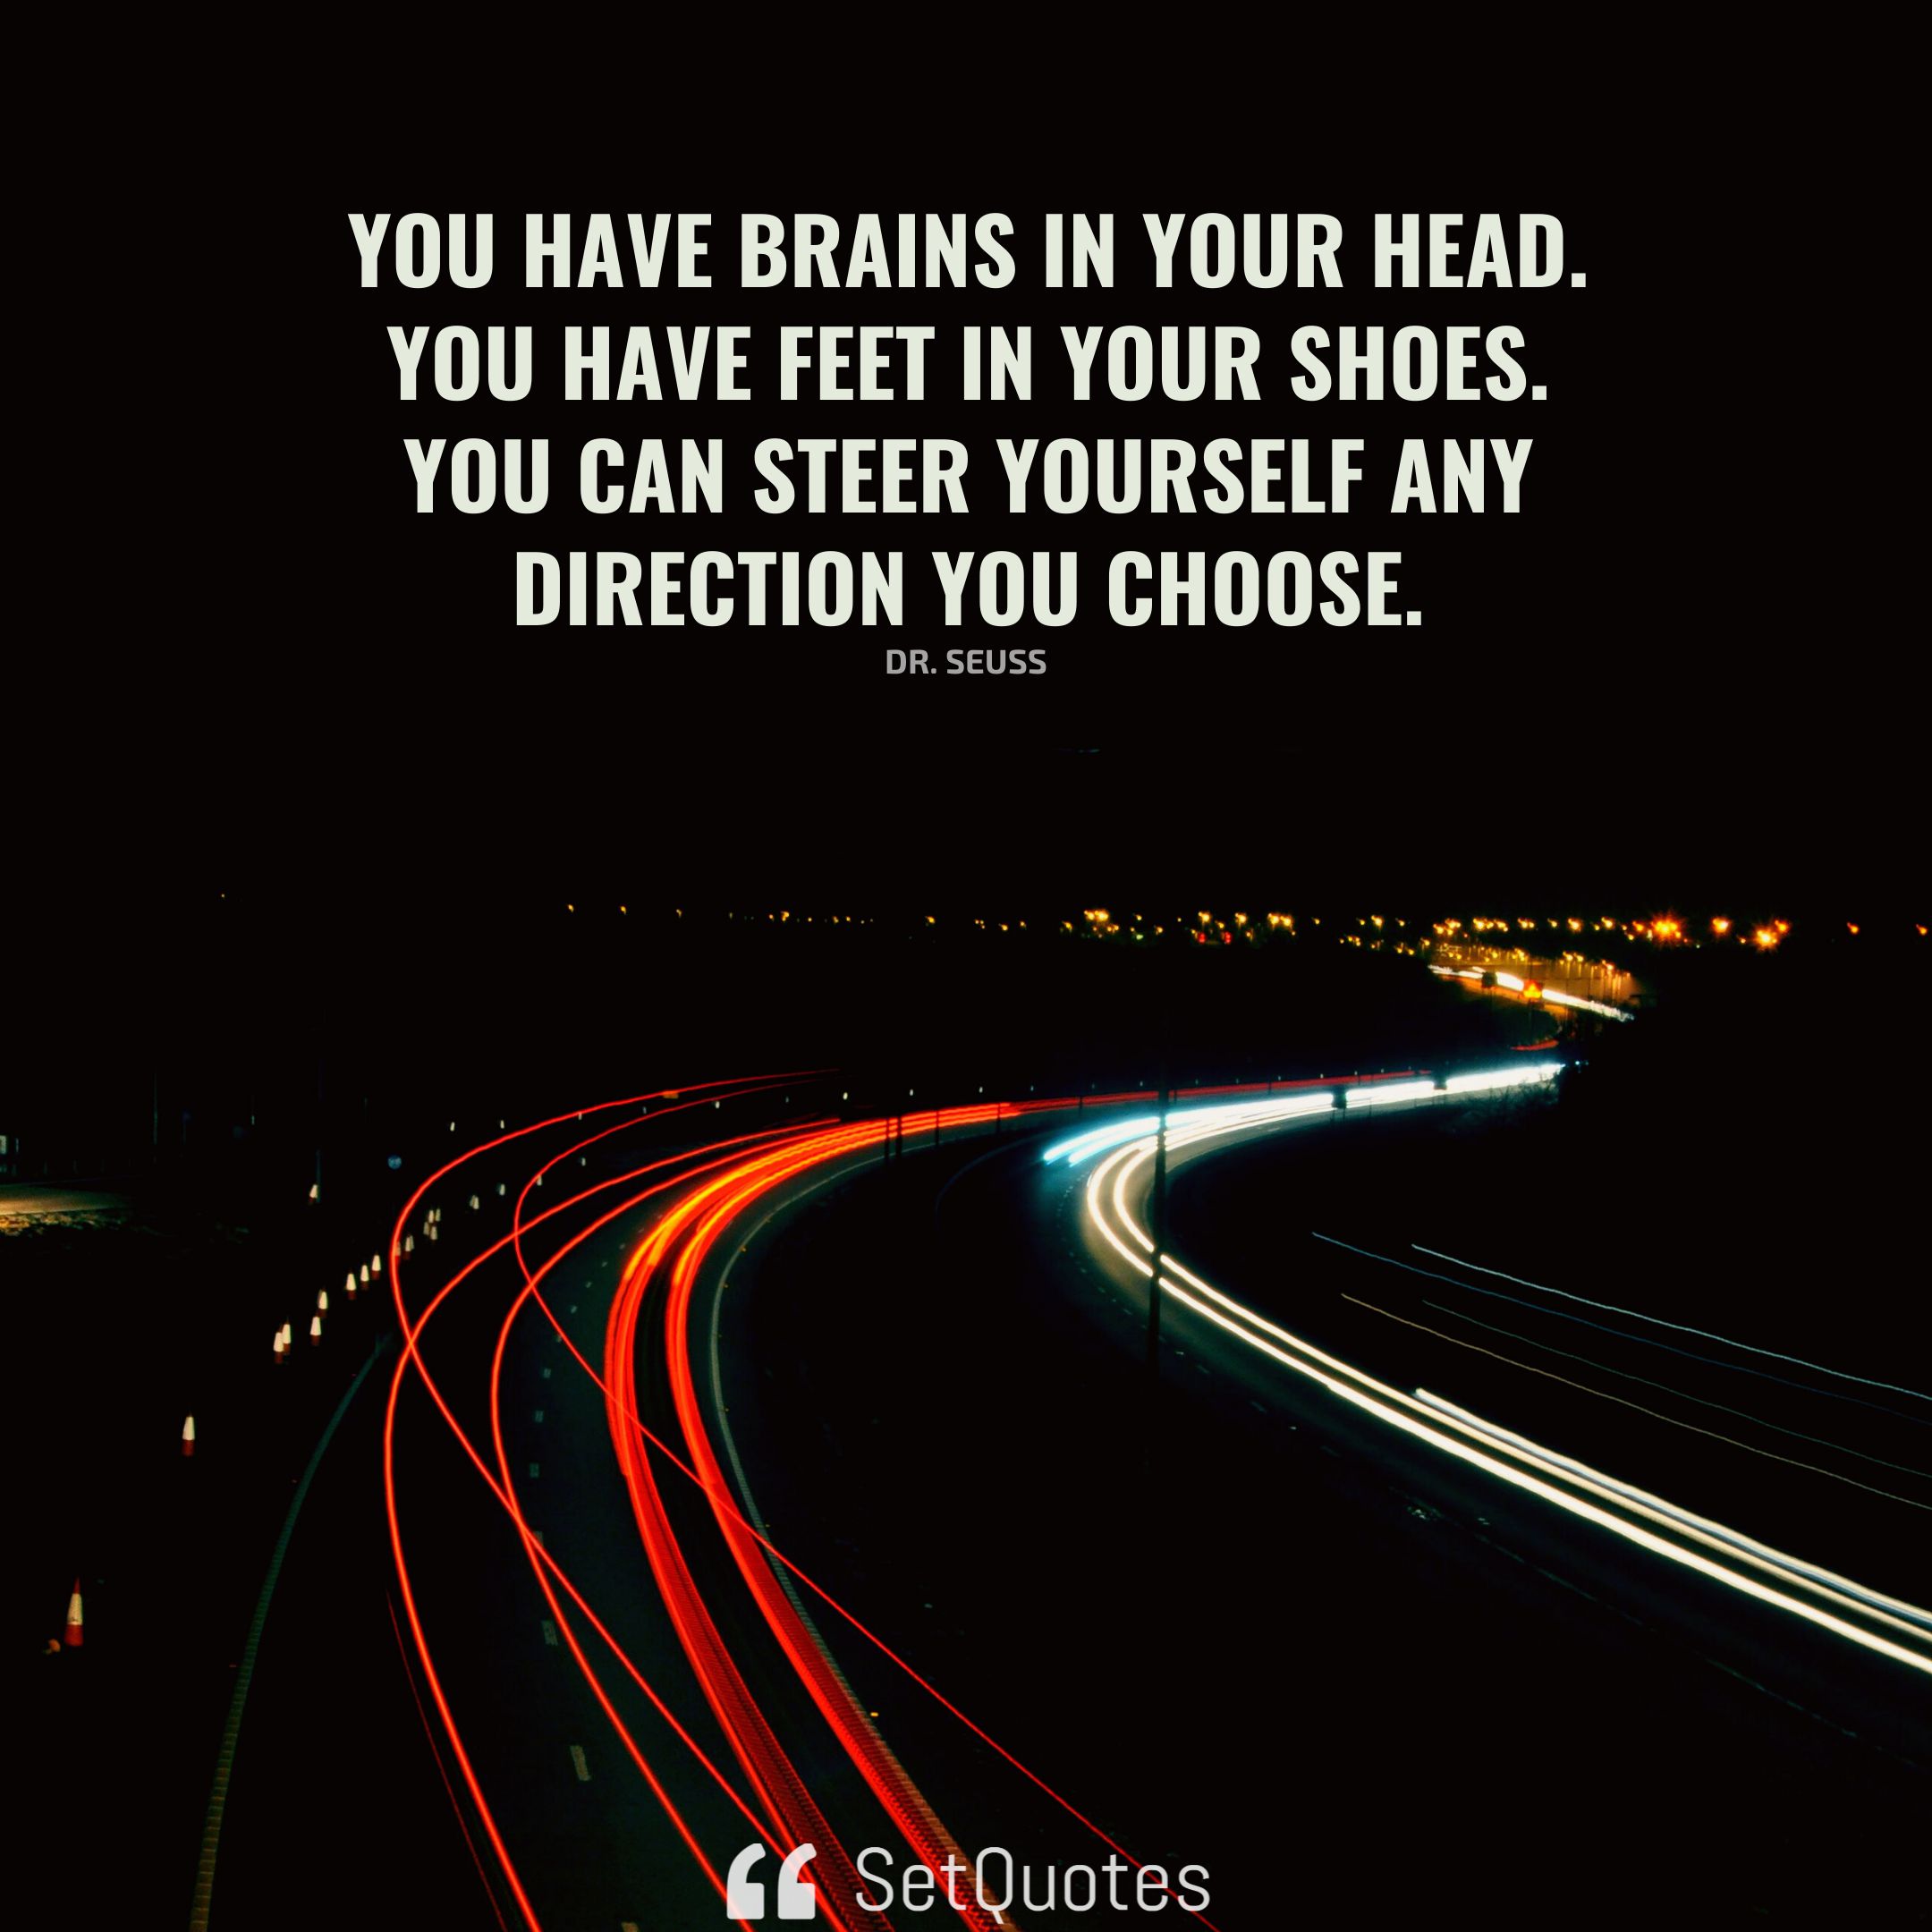 You have brains in your head. You have feet in your shoes. You can steer yourself any direction you choose. -Dr. Seuss - SetQuotes